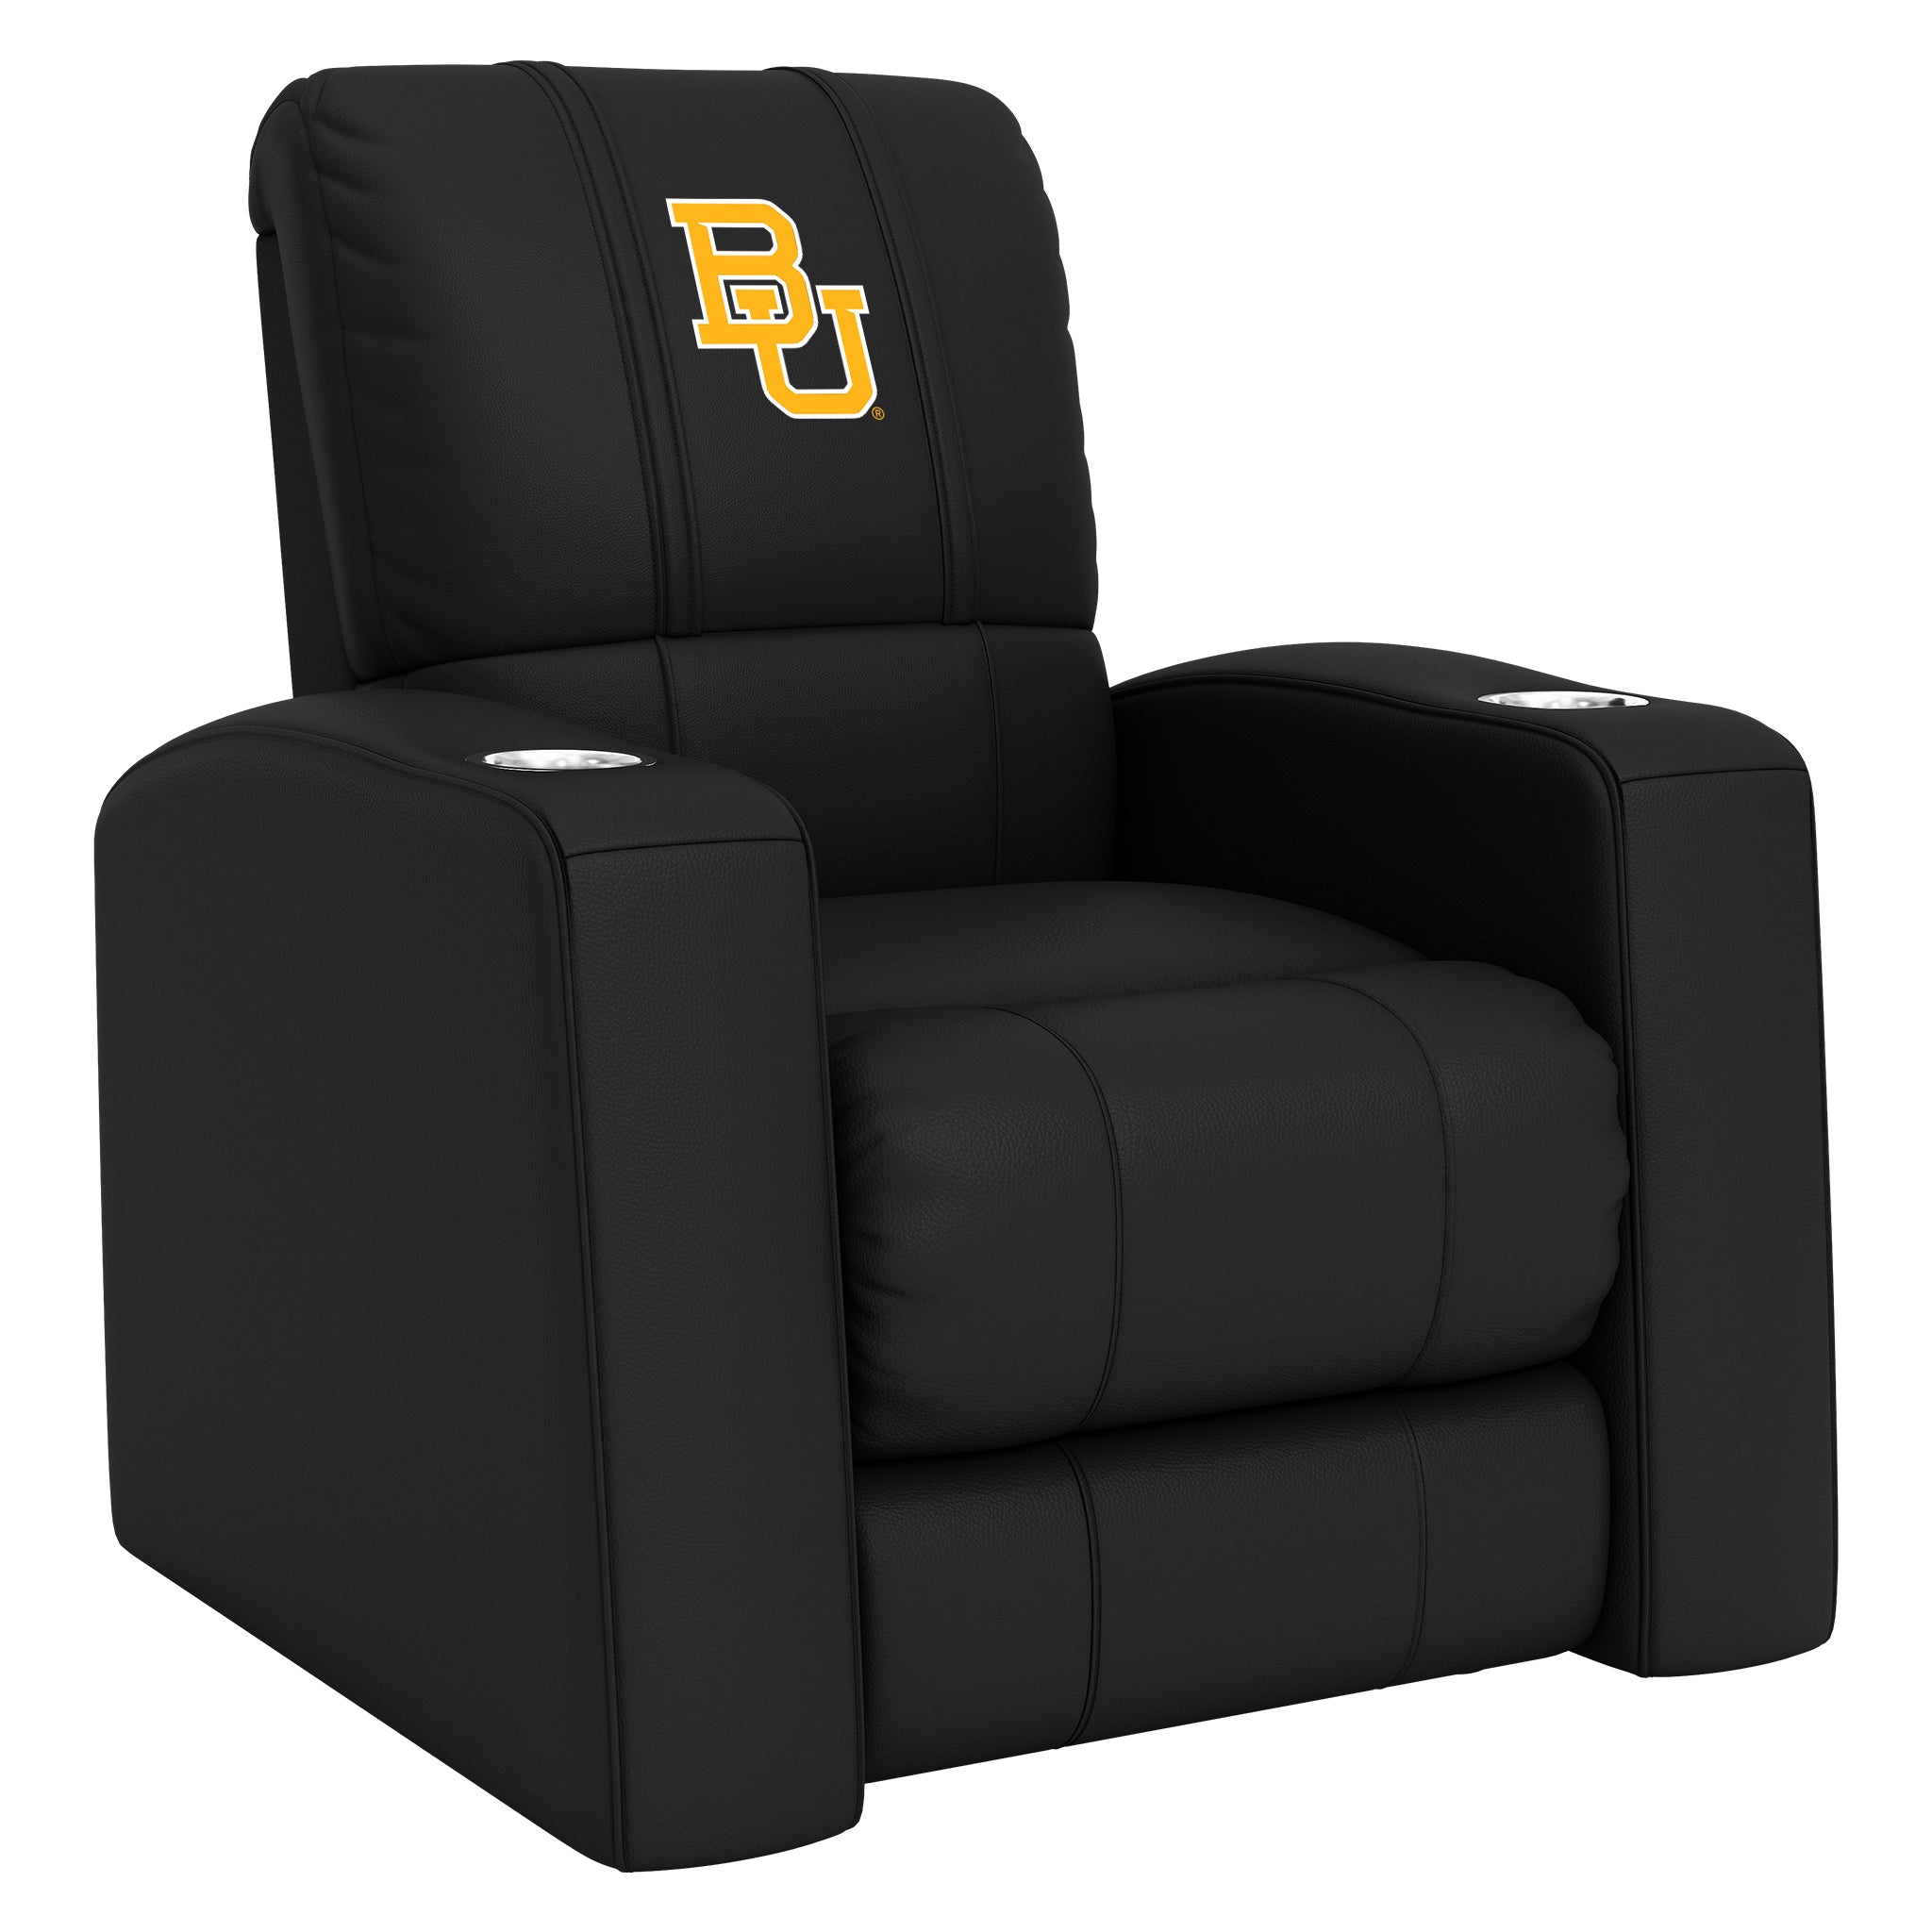 Baylor Bears Home Theater Recliner with Baylor Bears Logo